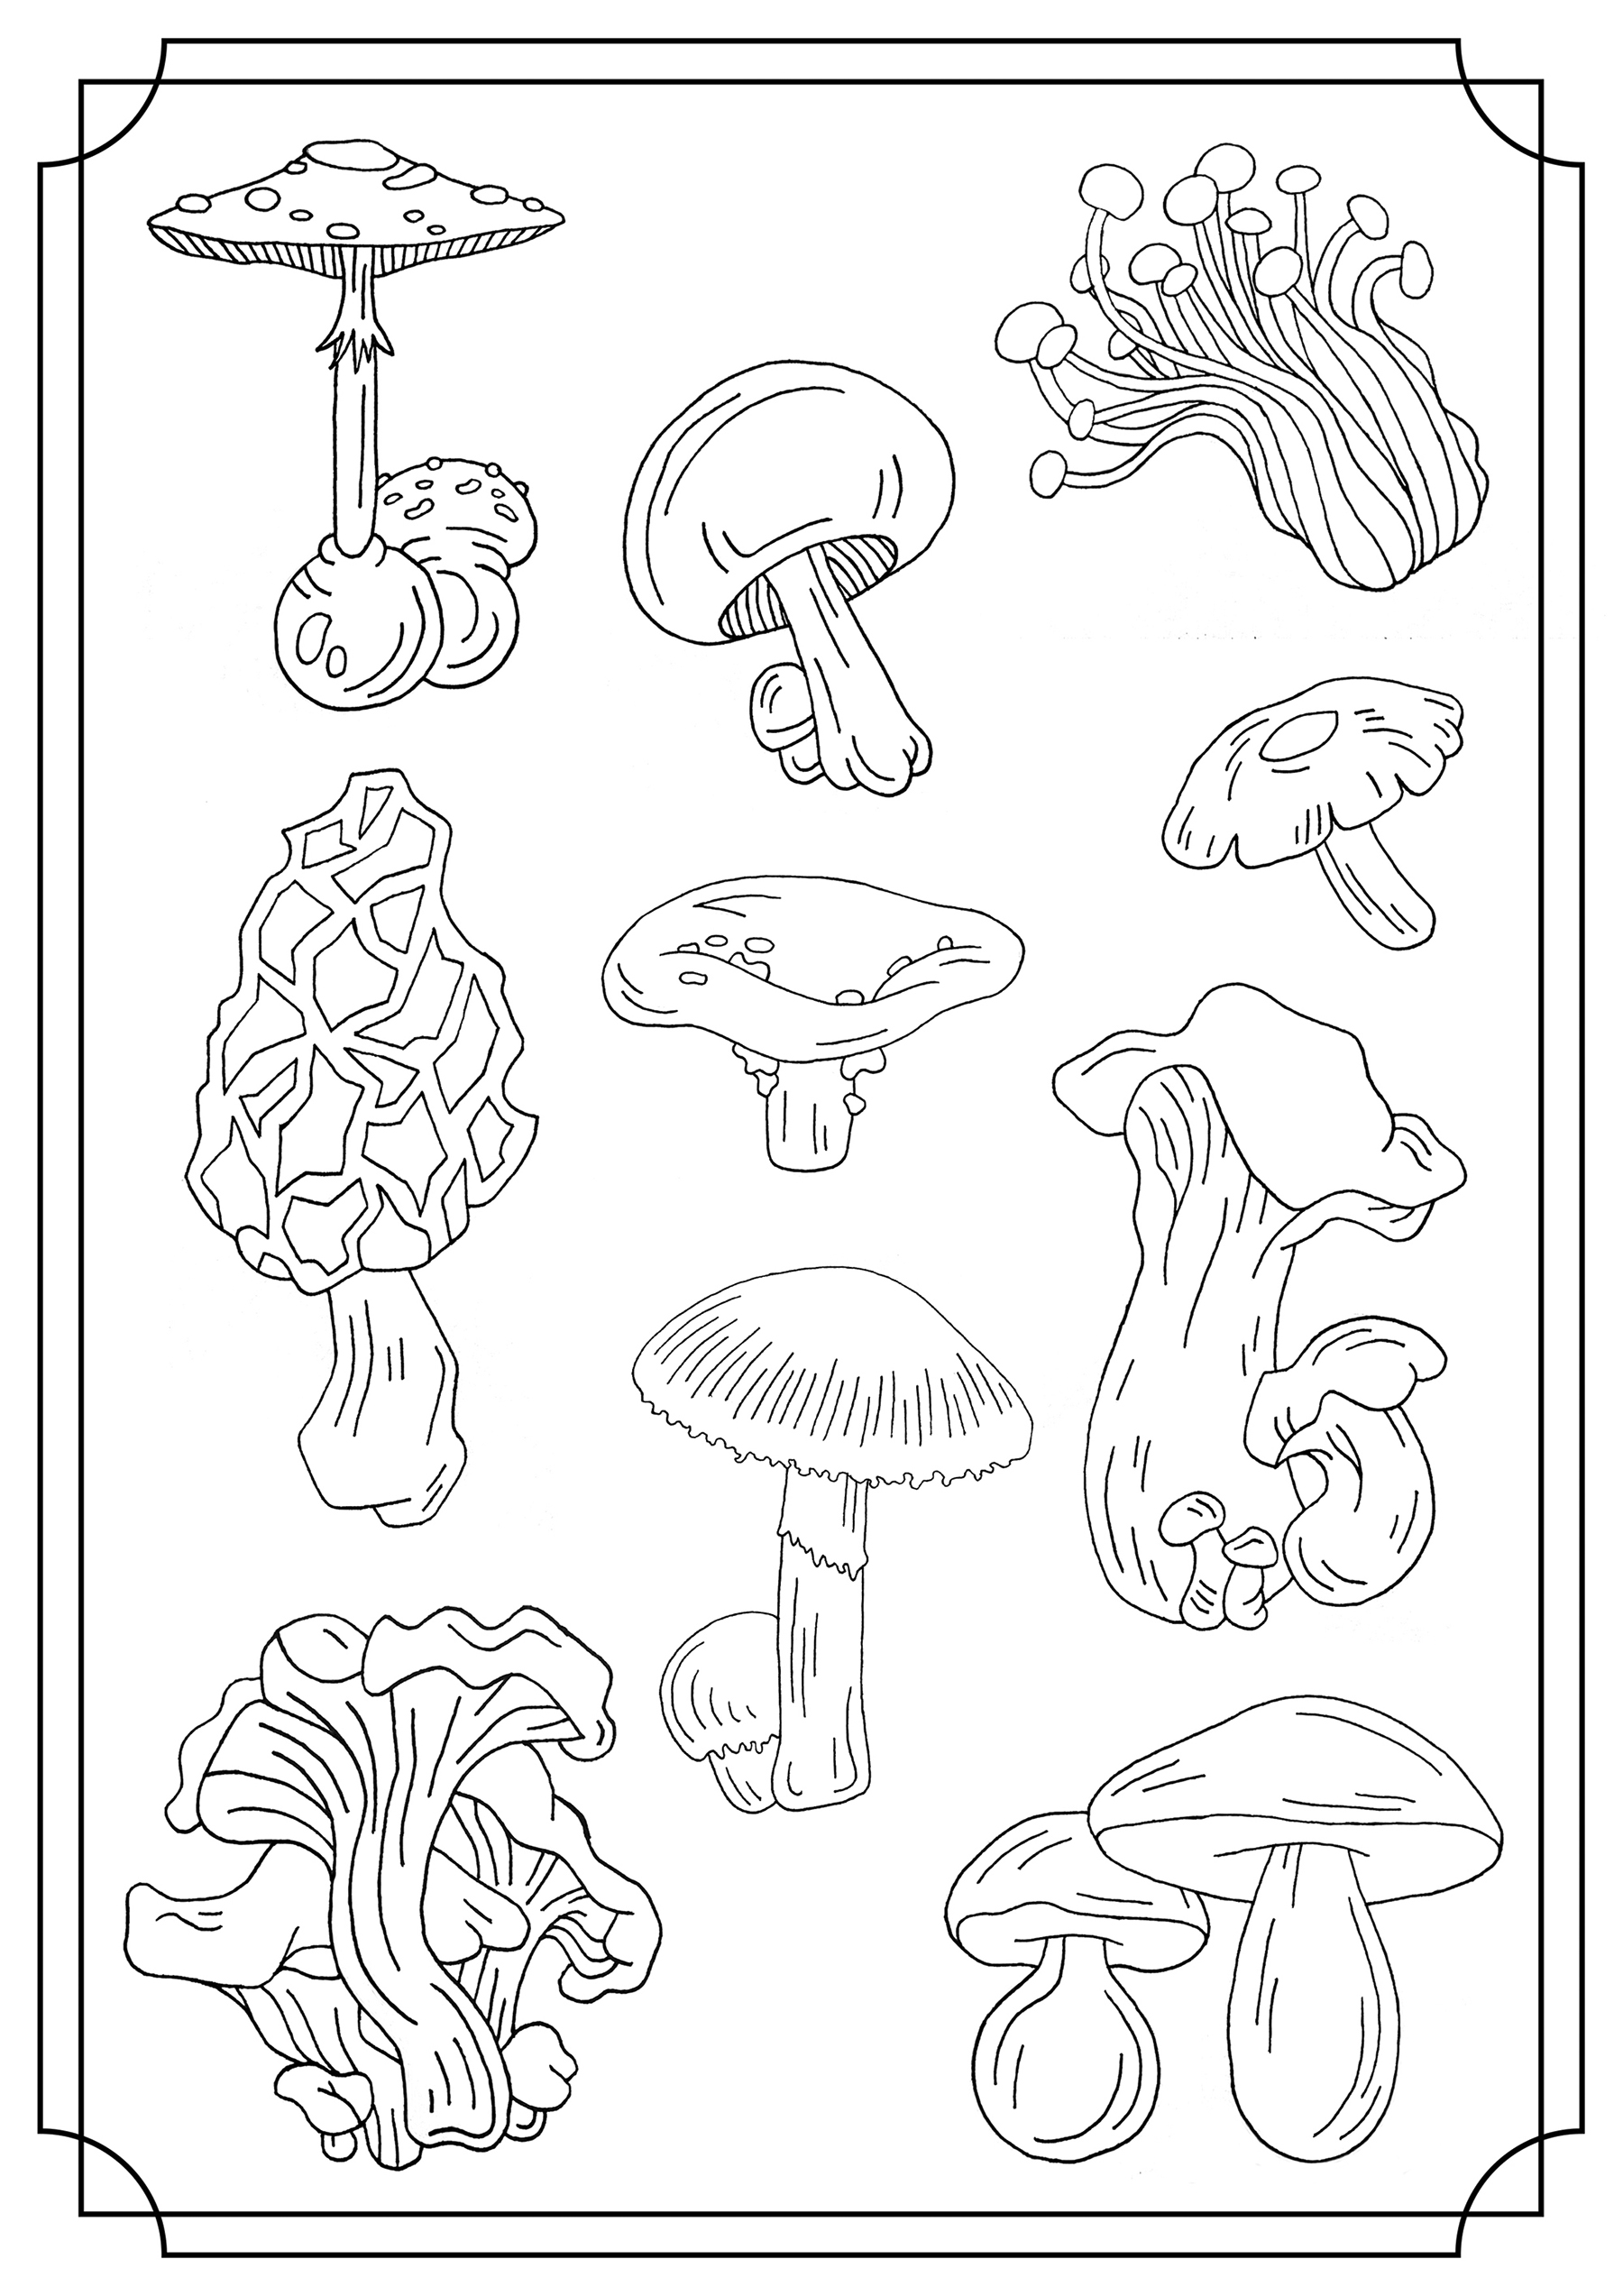 Easy Mushroom Coloring Pages Coloring Pages